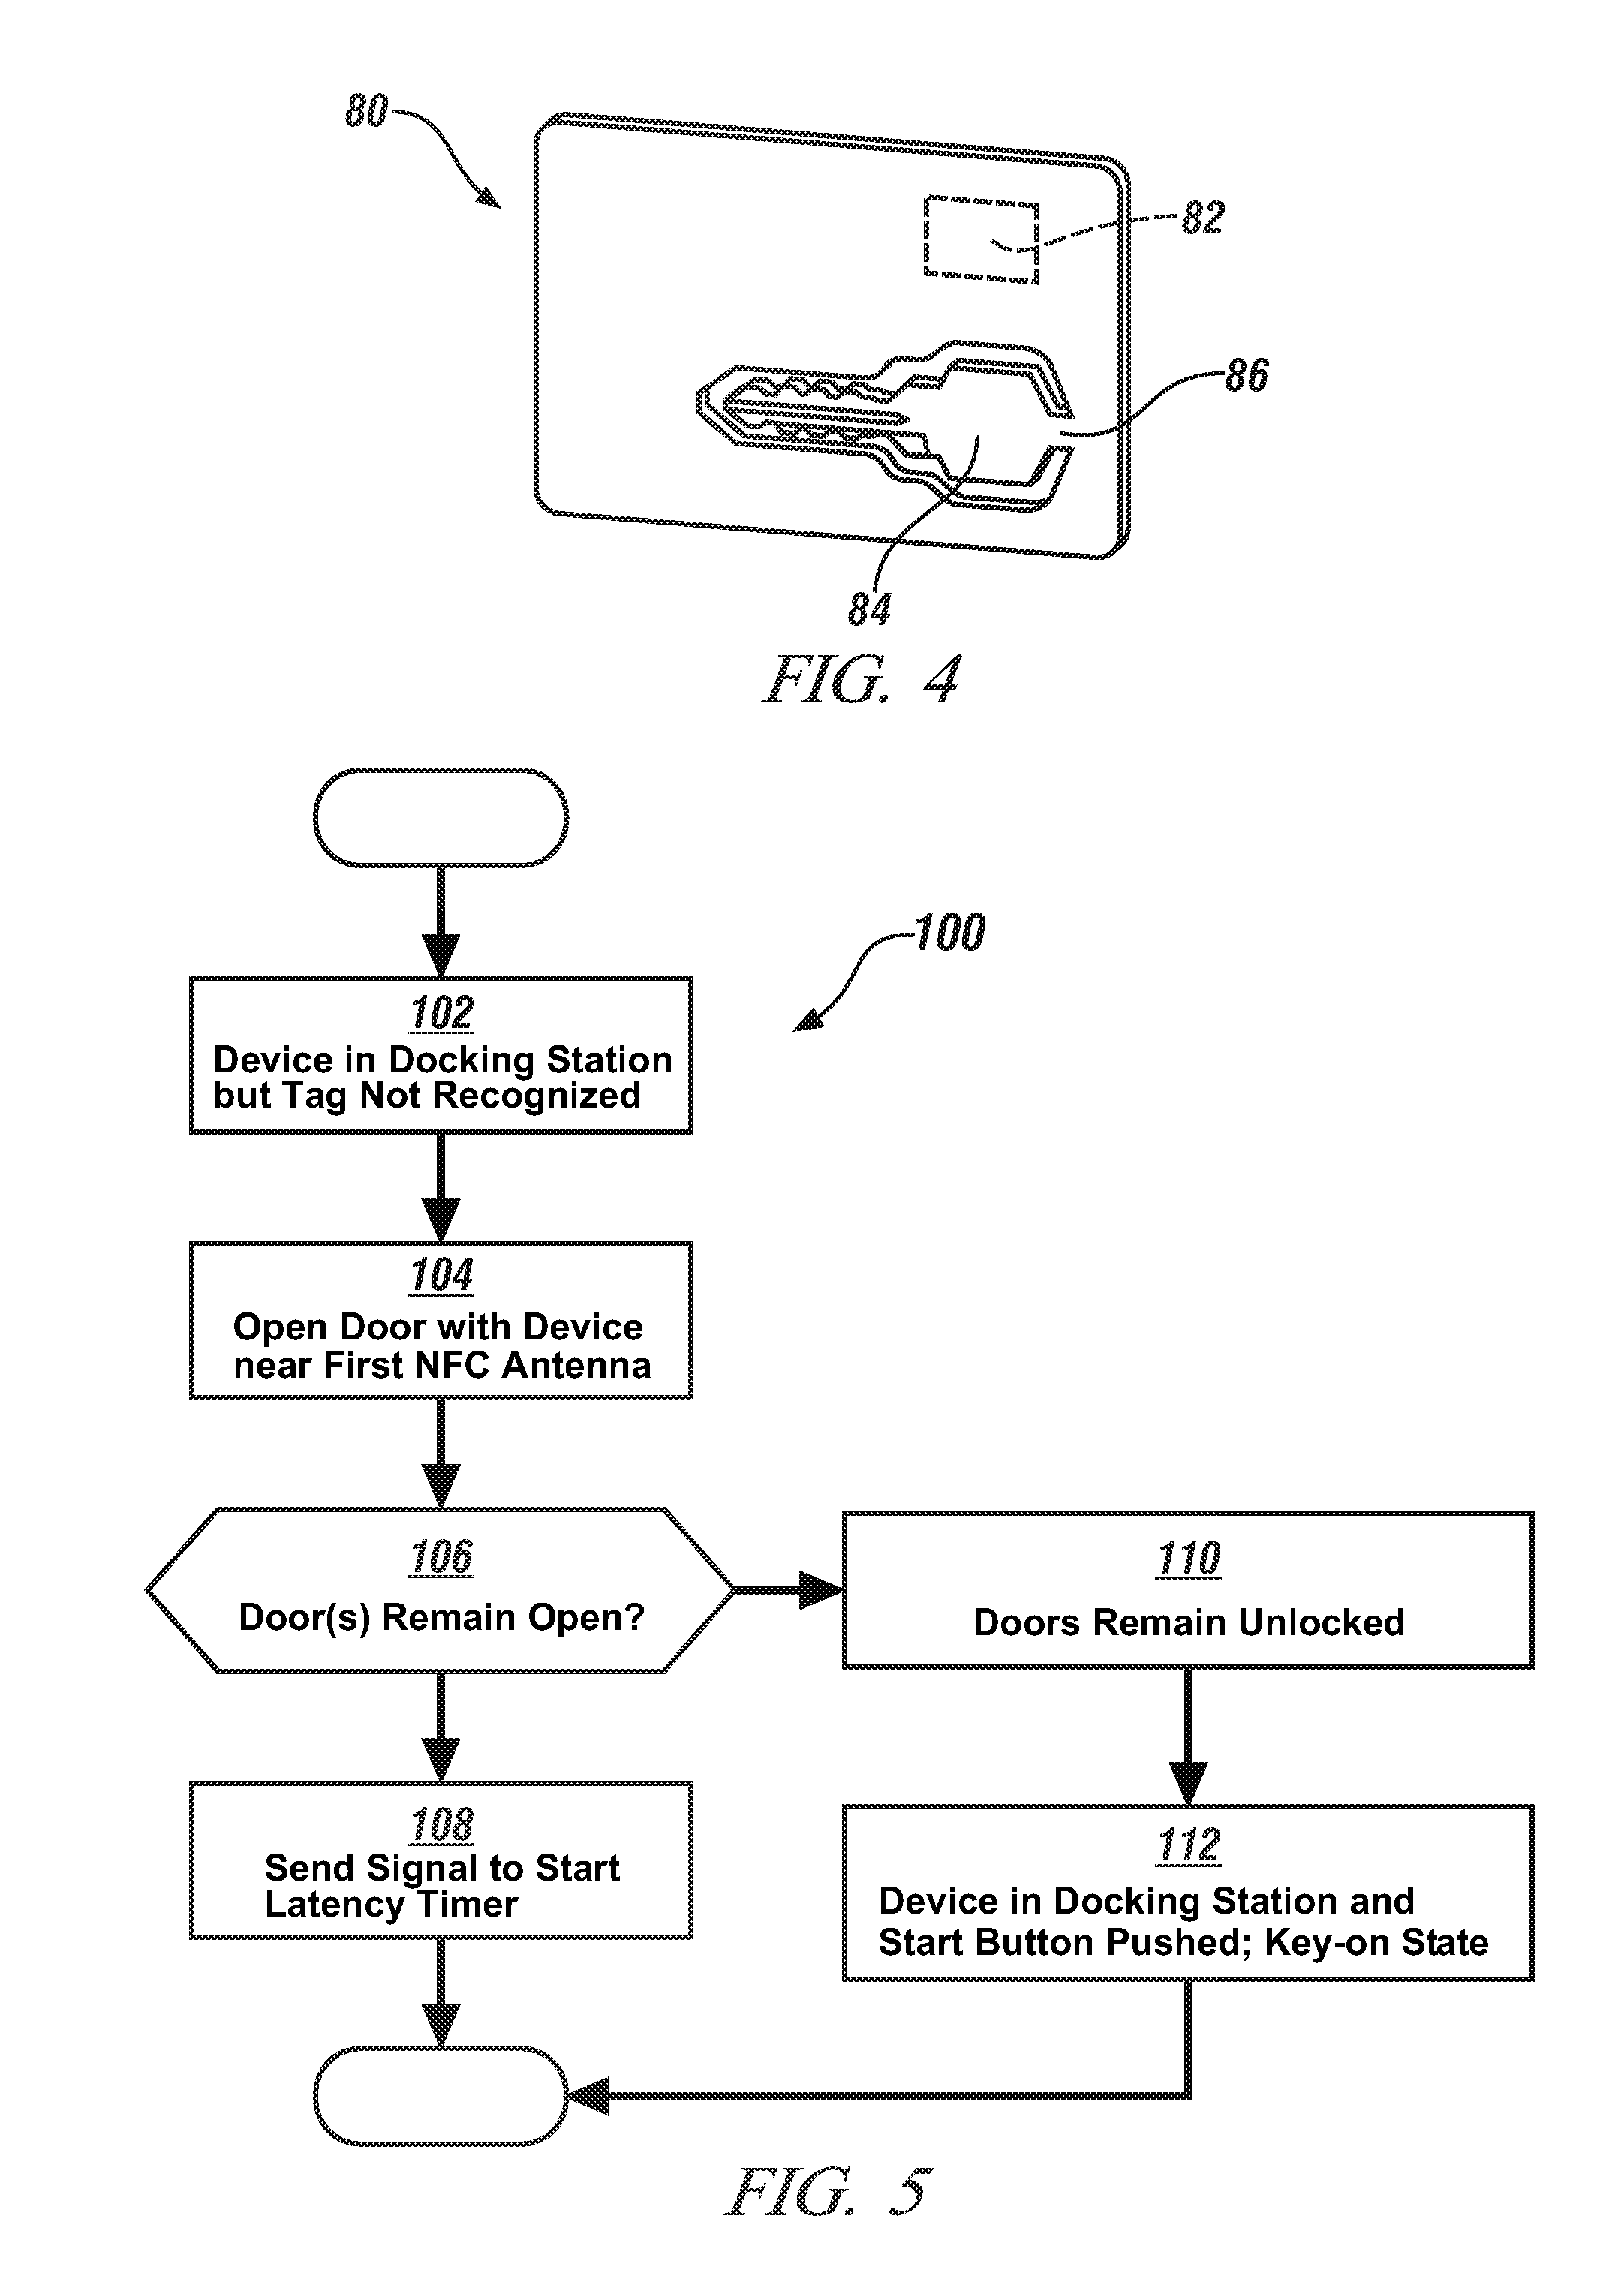 System for passive entry and passive start using near field communication